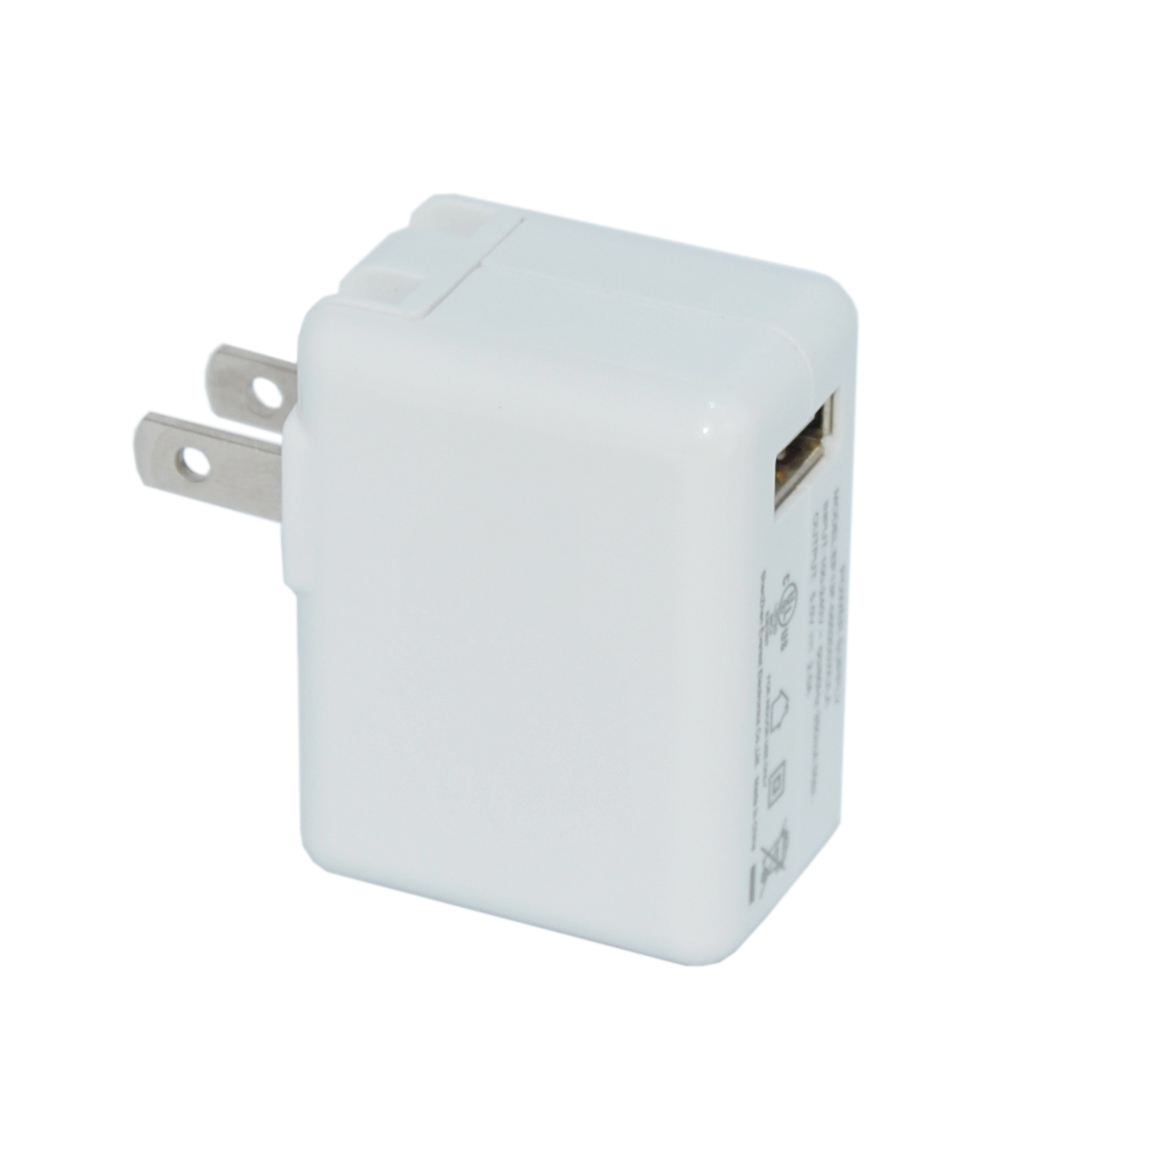 New Design Fast Charge single port 5V 1A usb wall charger home Charger for iphone & Samsung